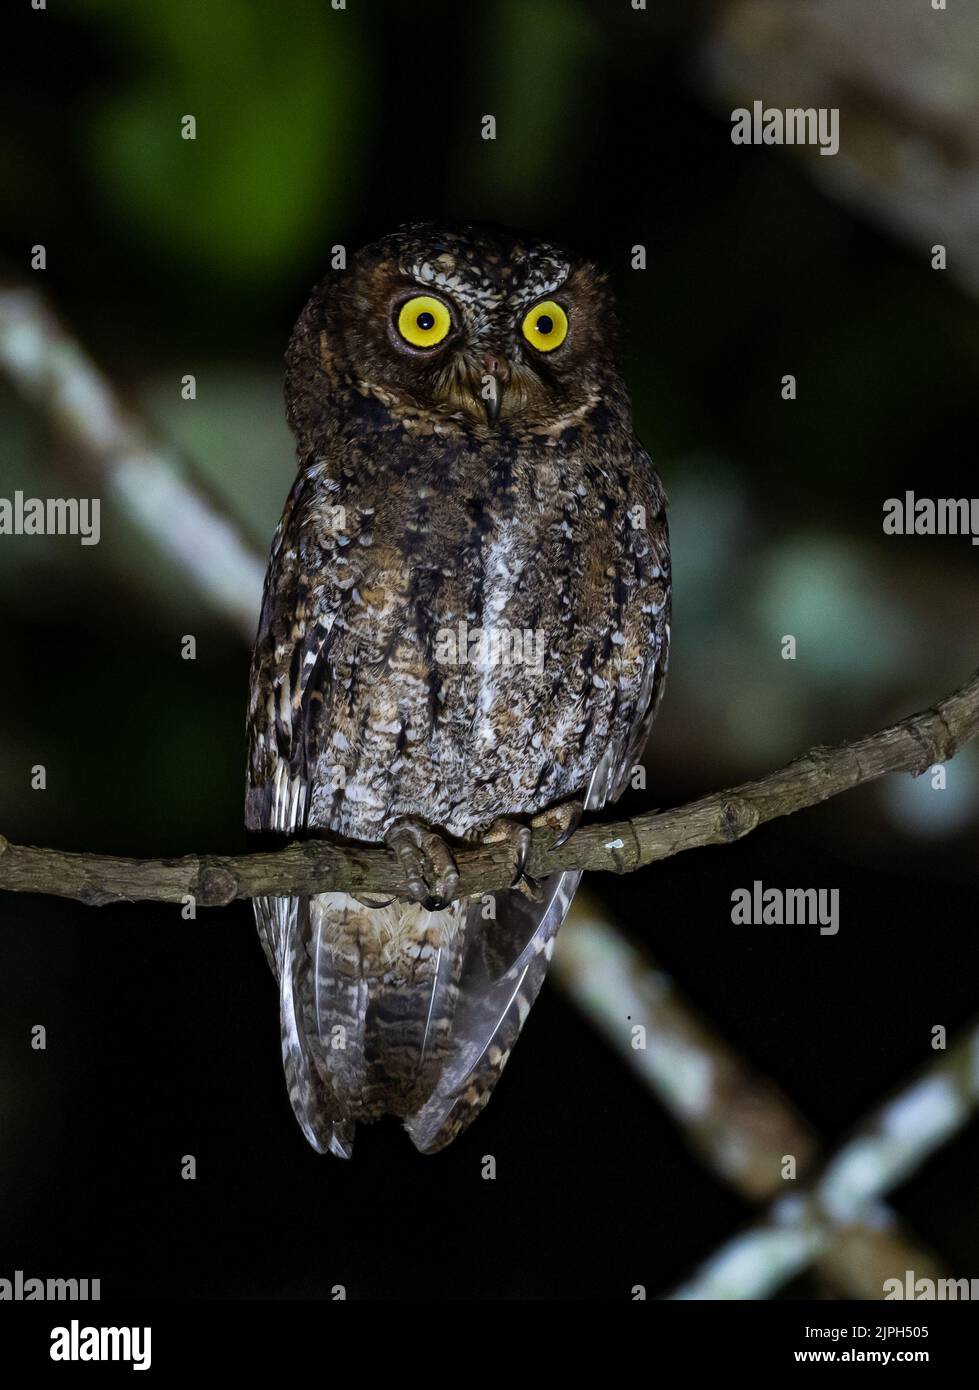 A Sulawesi Scops-Owl () perched ona branch at night. Sulawesi, Indonesia. Stock Photo